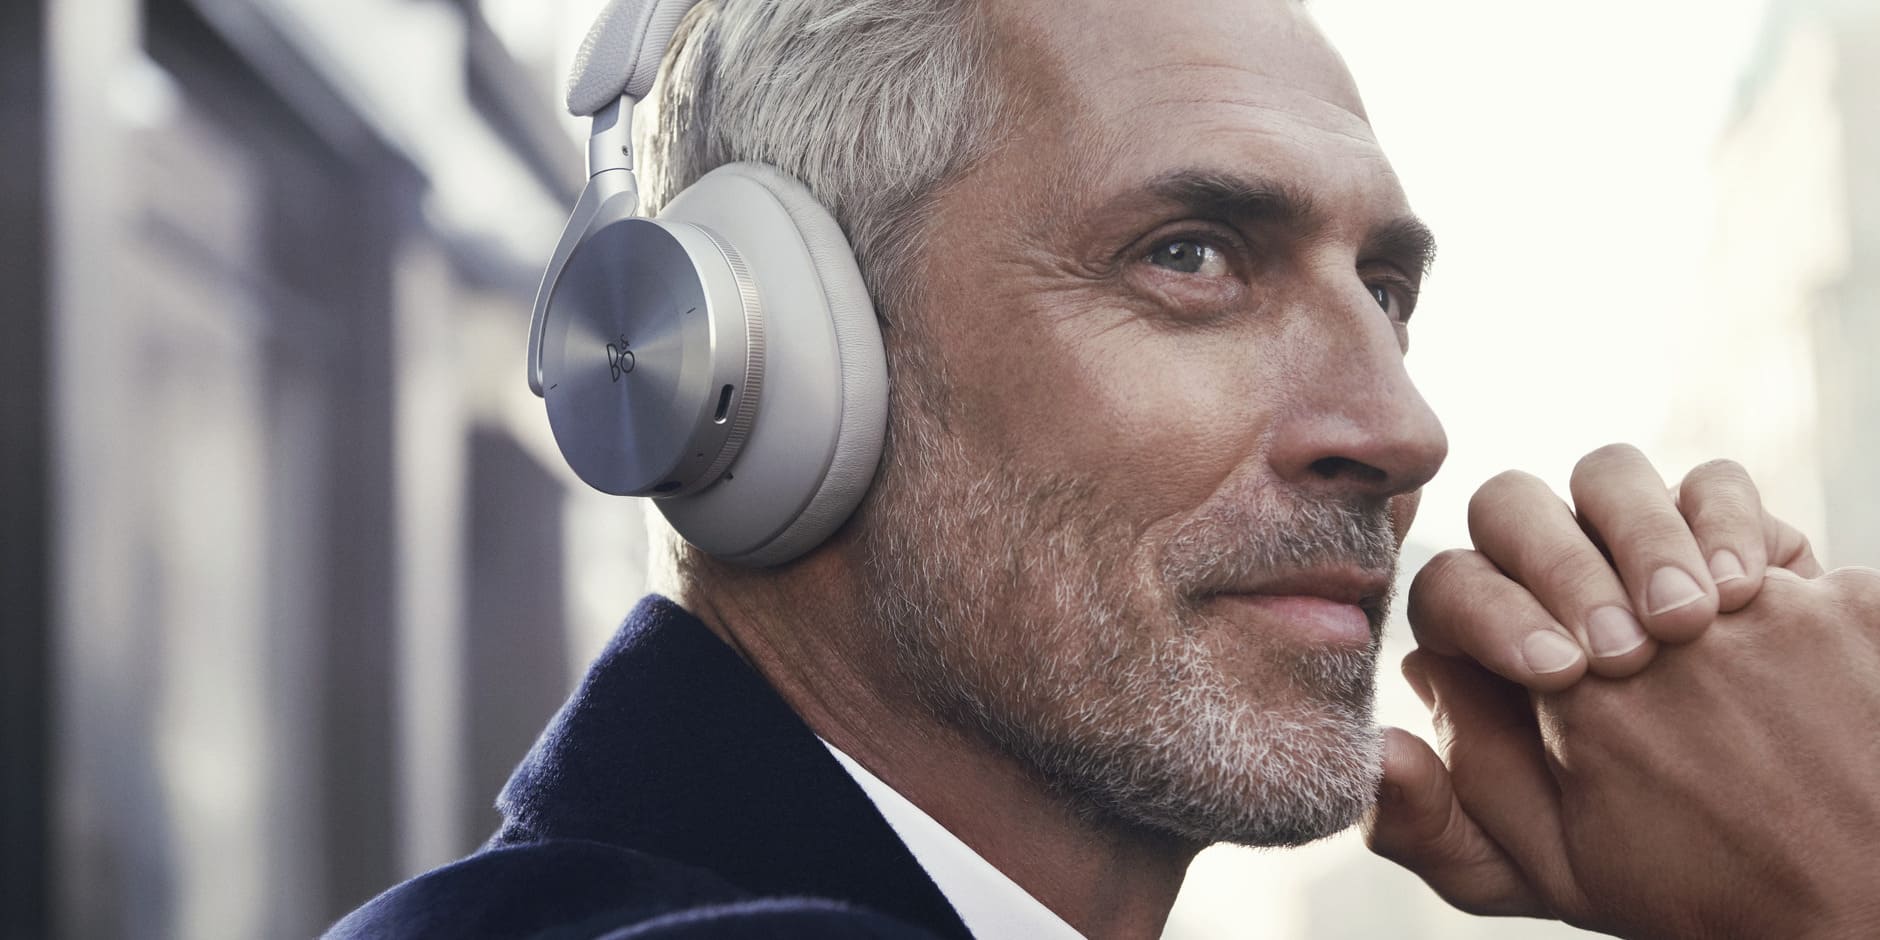 Beoplay H95 Casque